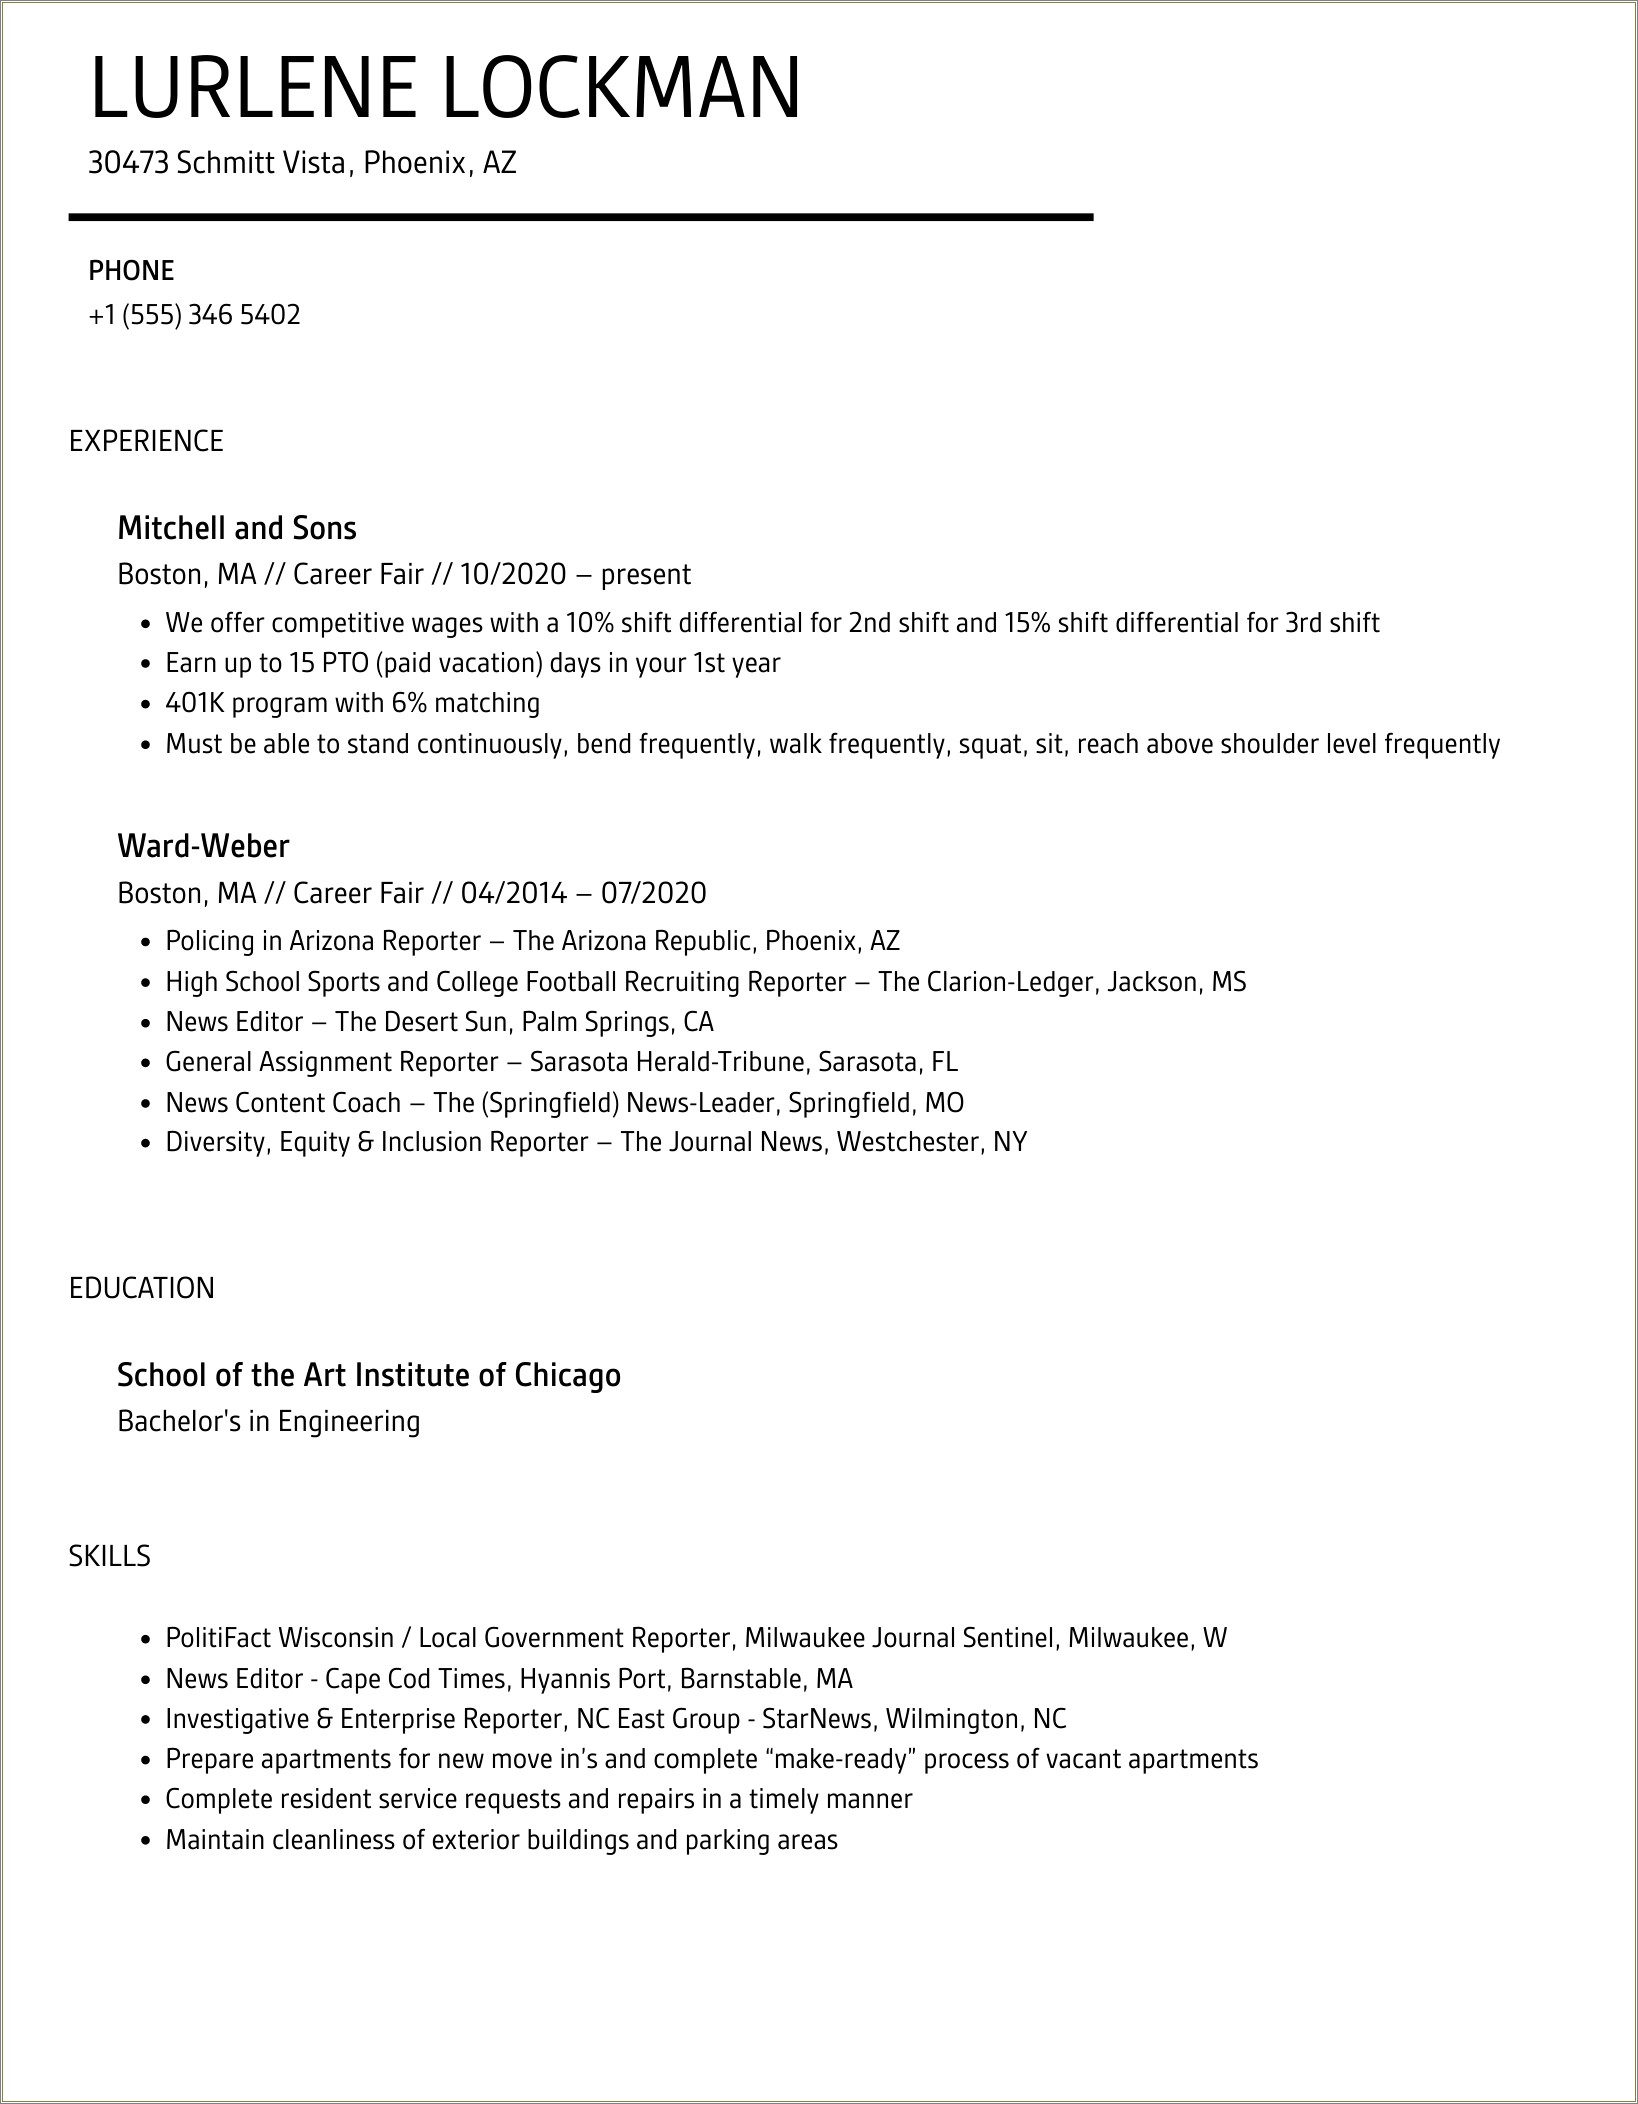 Resume Objective Examples For Job Fair